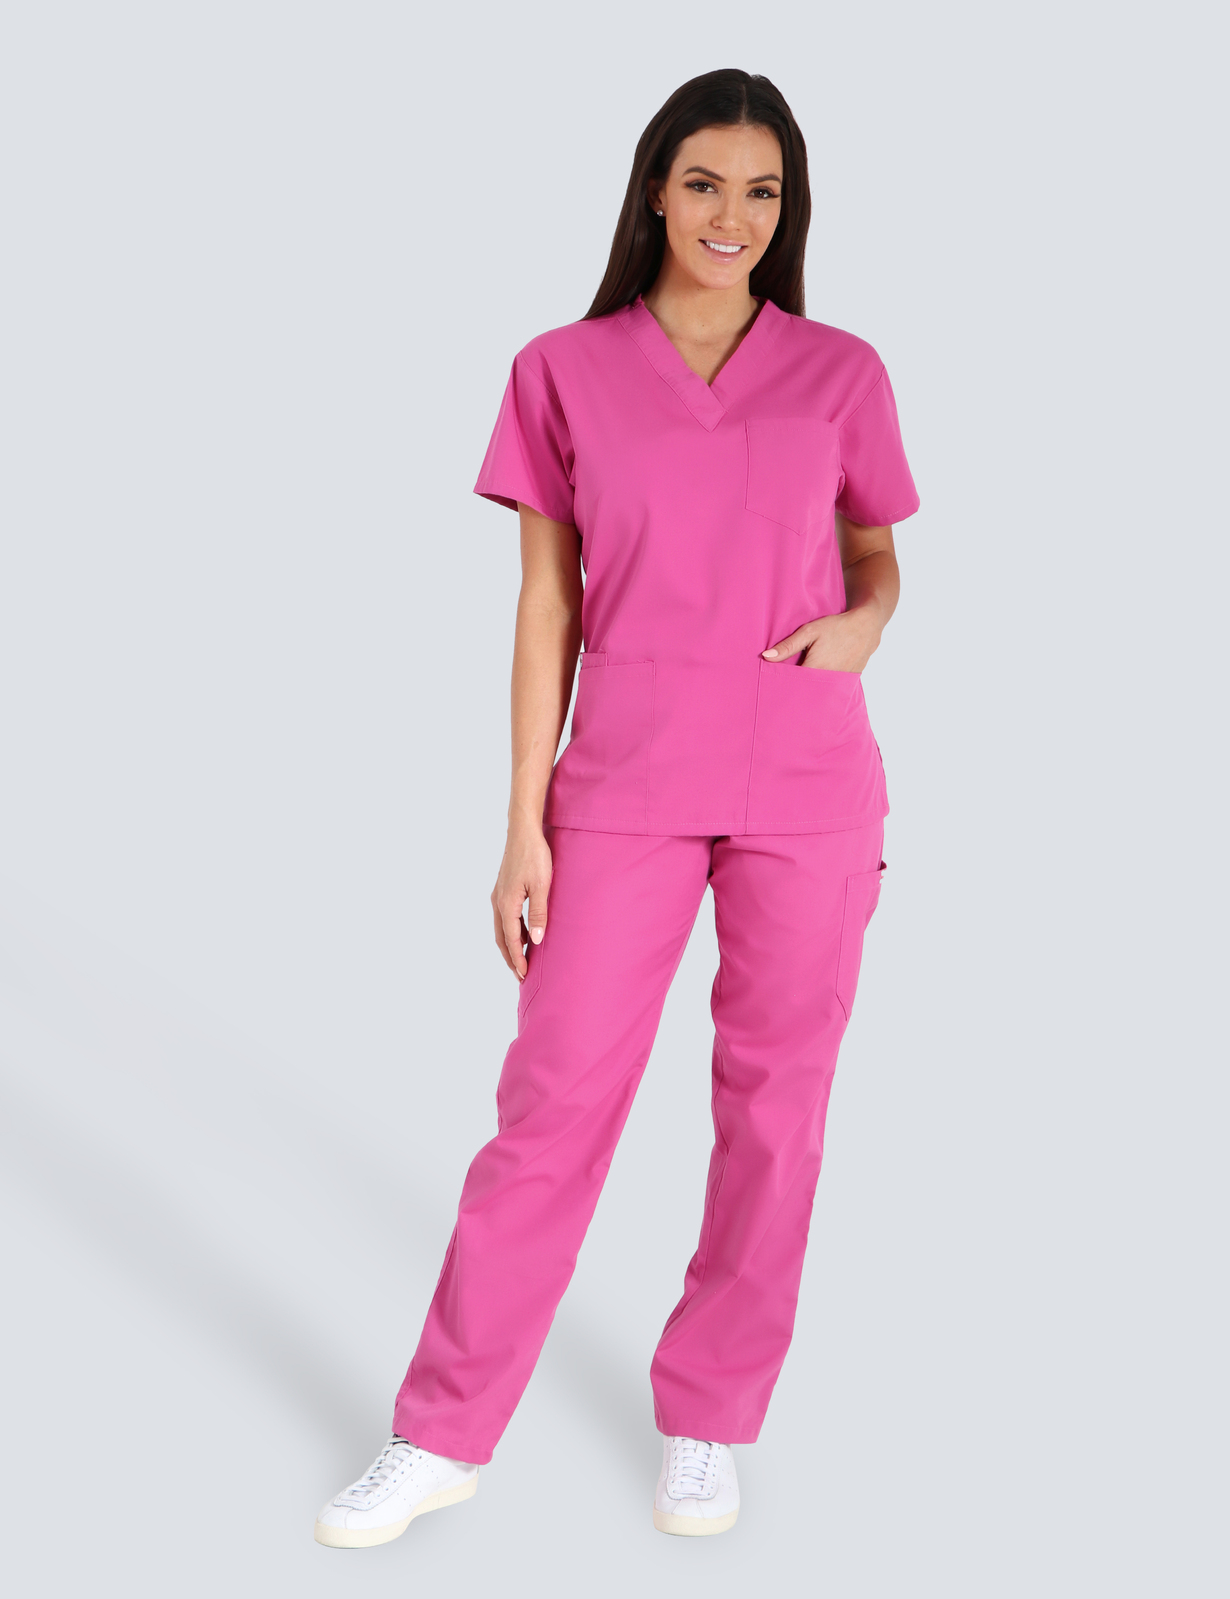 Children's Hospital Melbourne - ED (4 Pocket Scrub Top and Cargo Pants in Pink incl Logos)